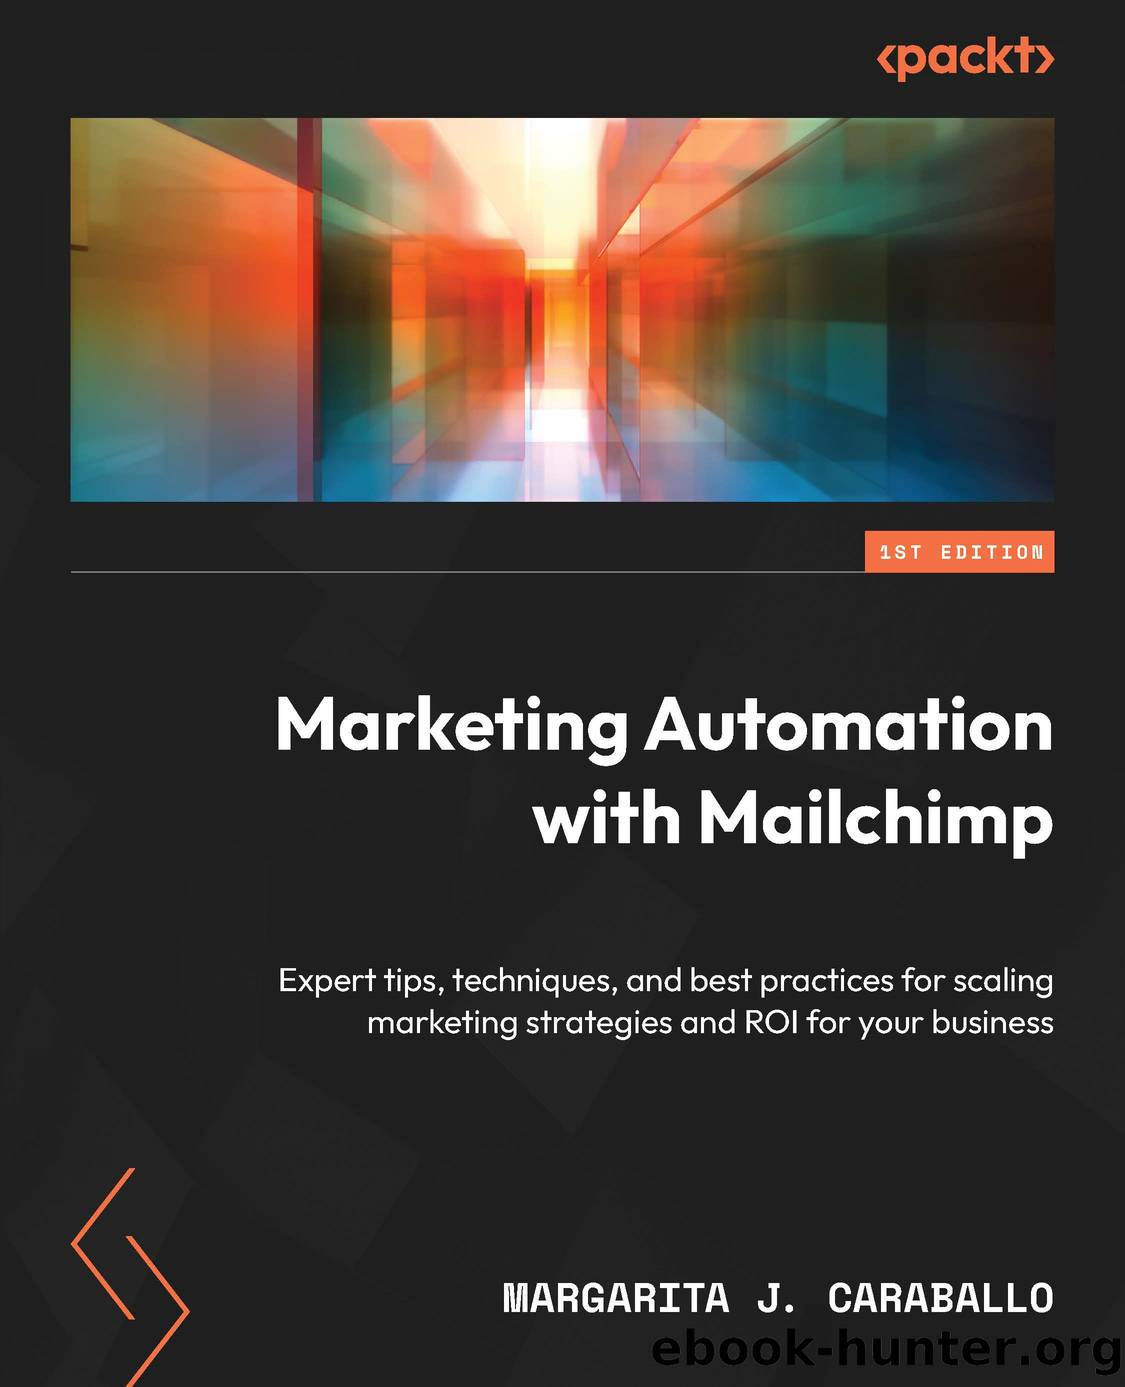 Marketing Automation with Mailchimp by Margarita J. Caraballo